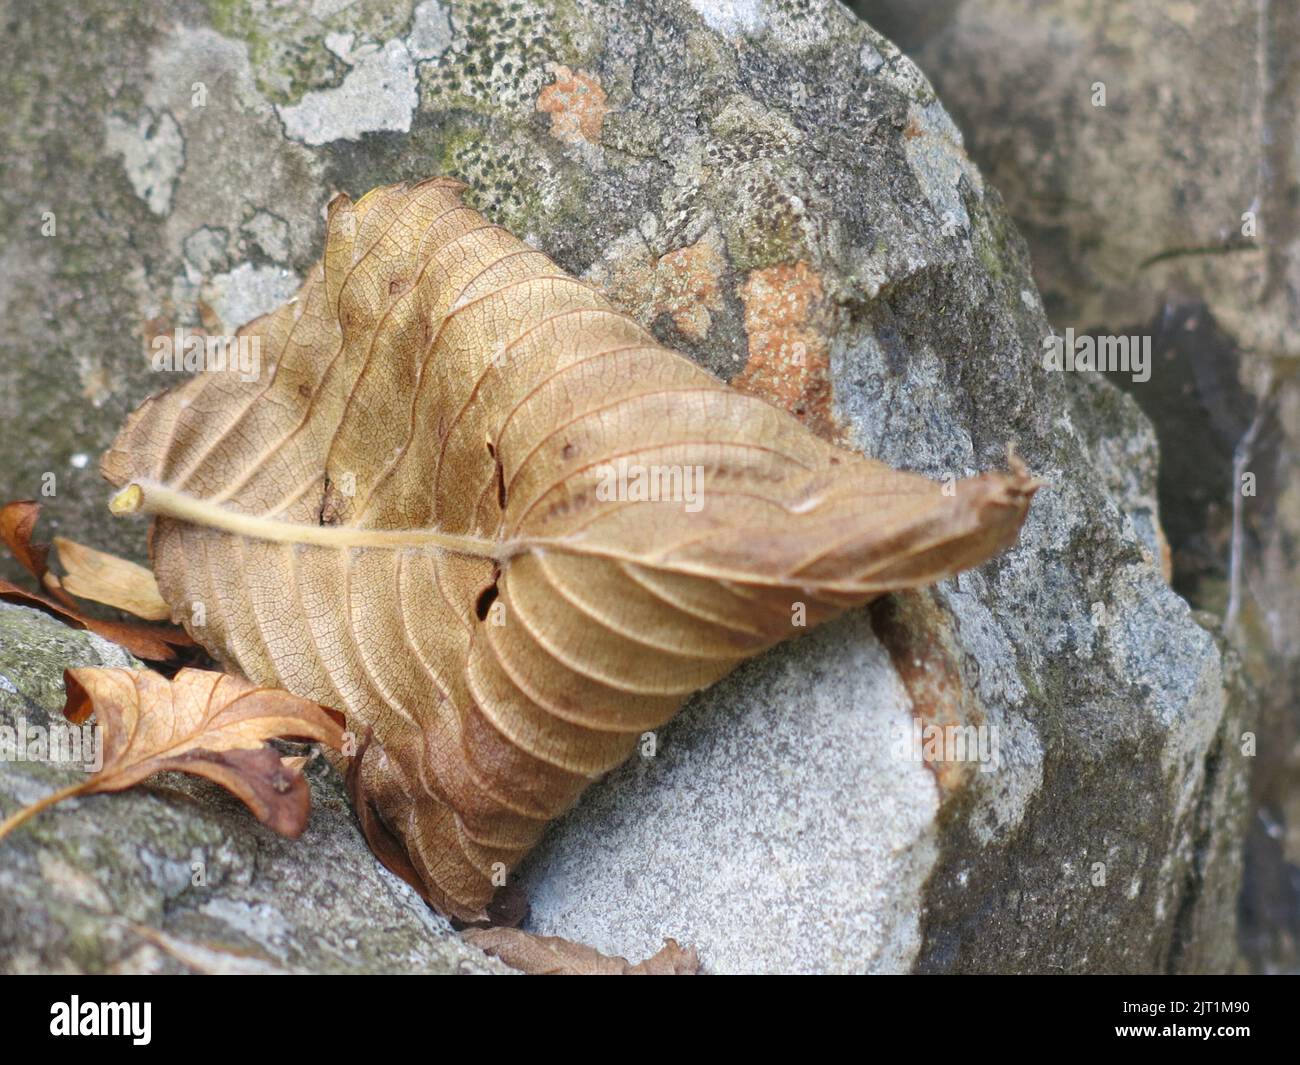 Still Life in Nature: close-up of a crispy brown leaf on a weathered large boulder in the English countryside. Stock Photo